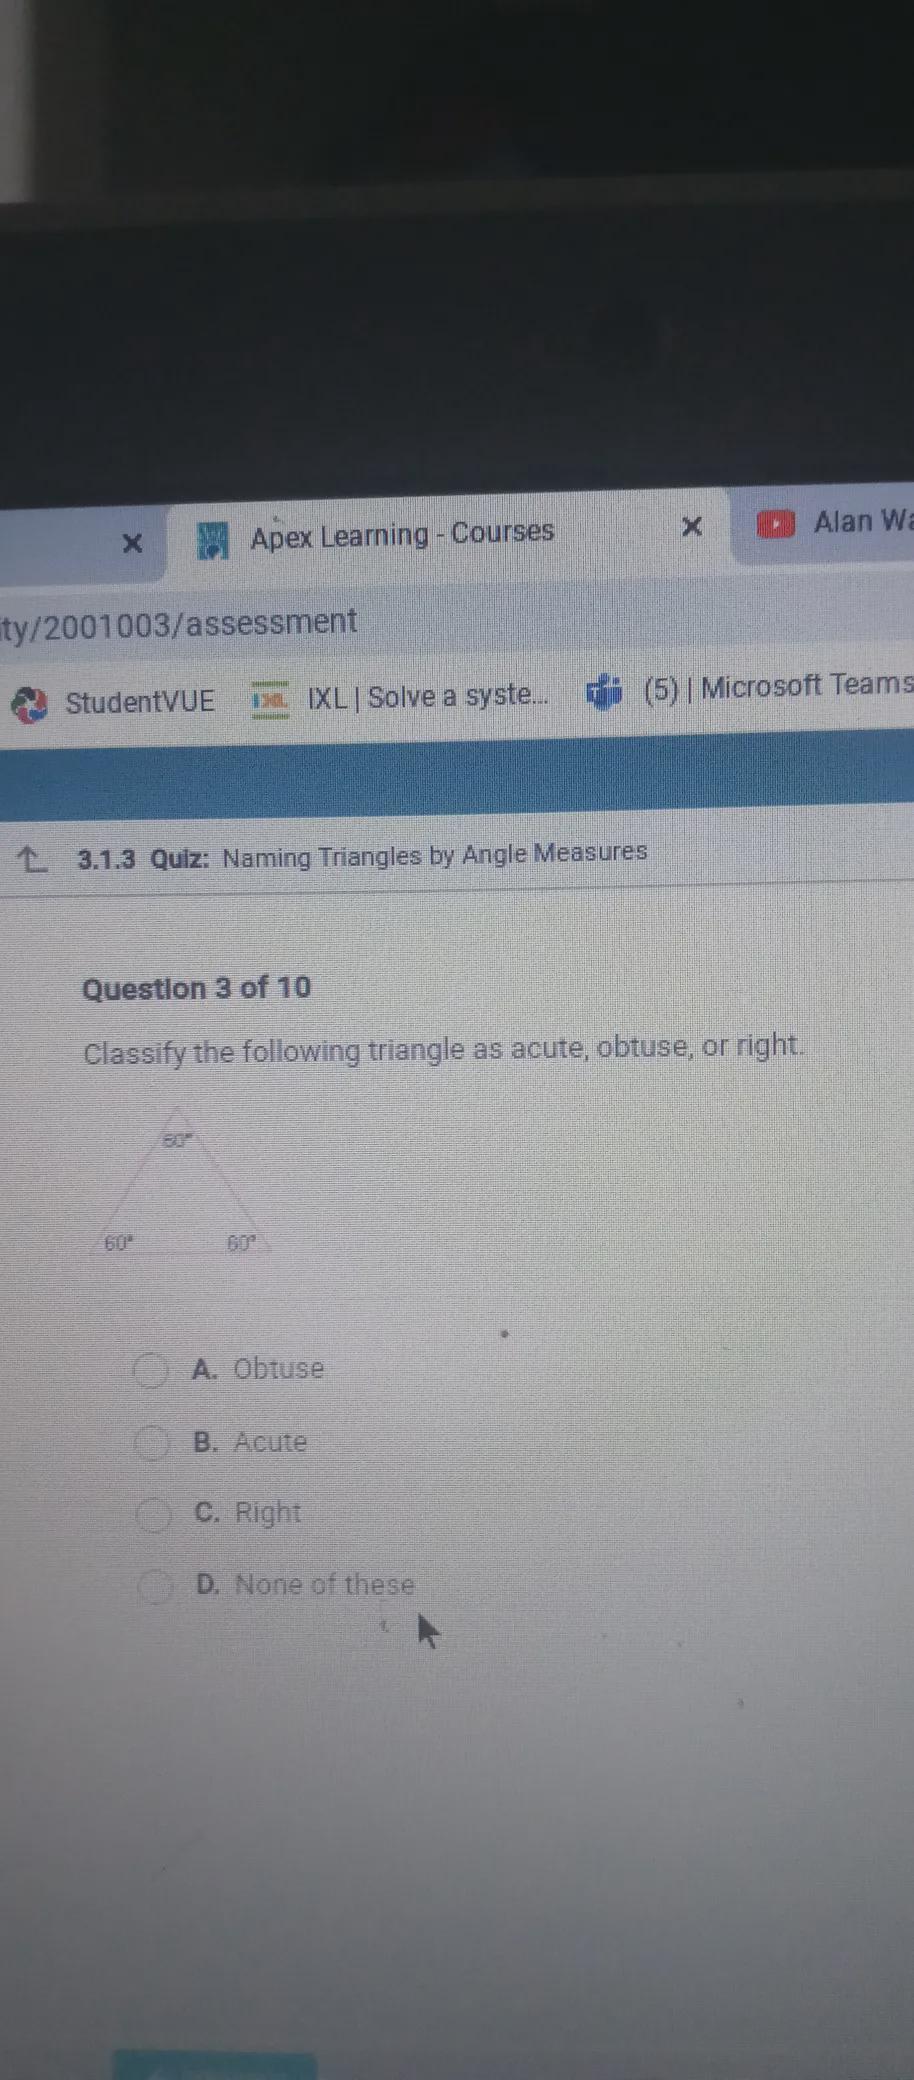 Classify The Following Triangle As Acute, Obtuse, Or RightO A. AcuteO B. ObtuseOc. RightOD. None Of TheseSUBMIT